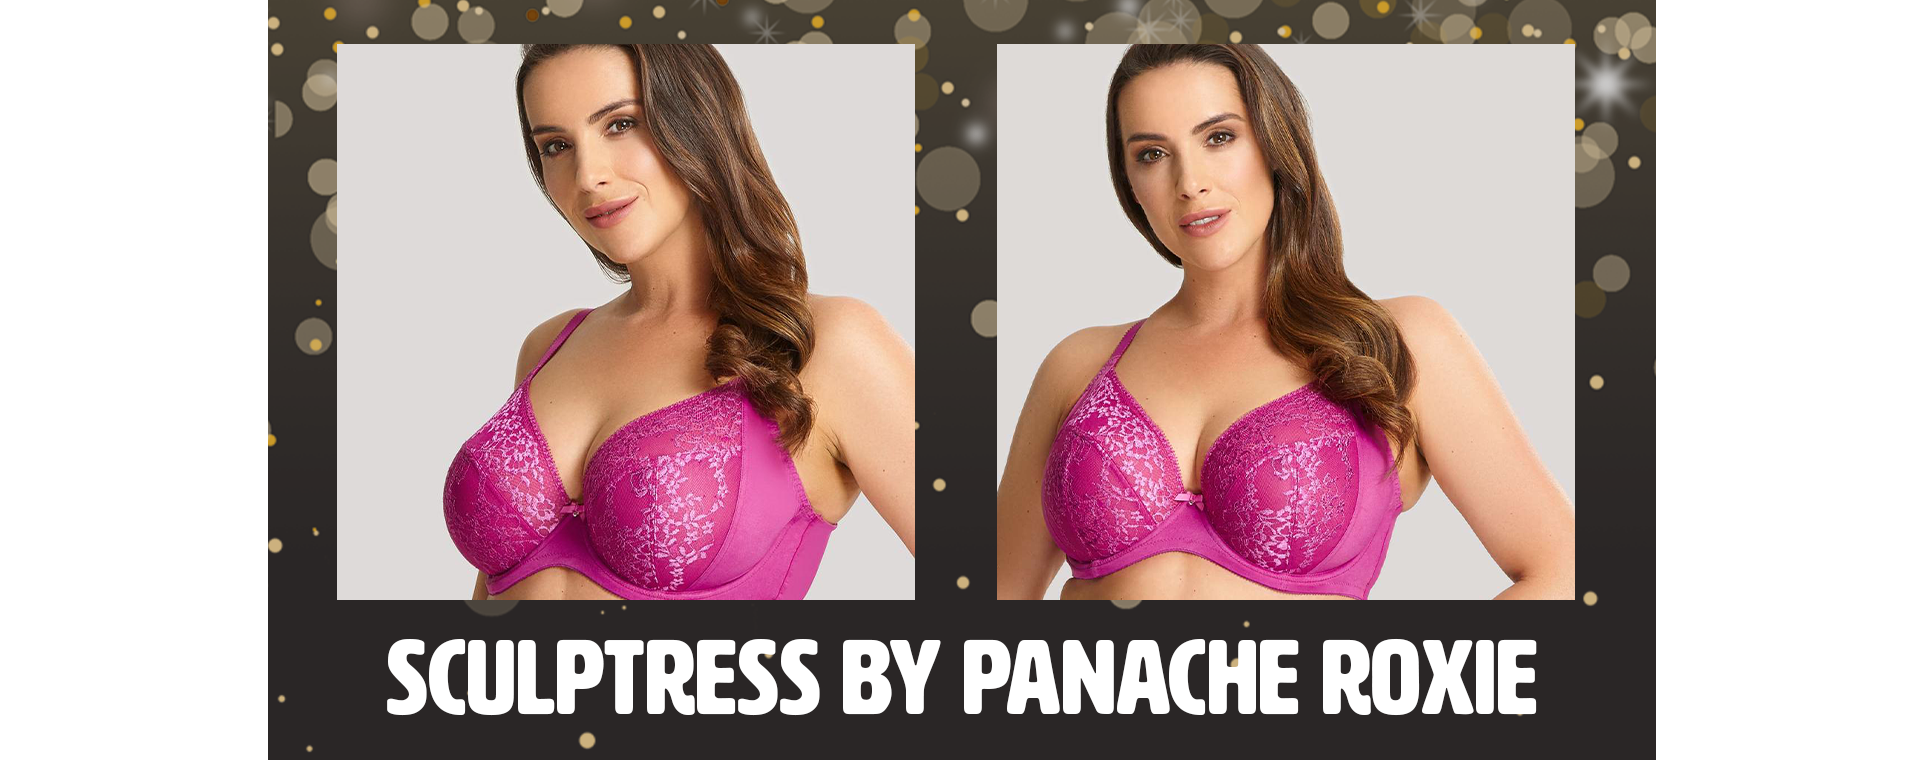 Which Plunge Bra is the Best Bra For Me?